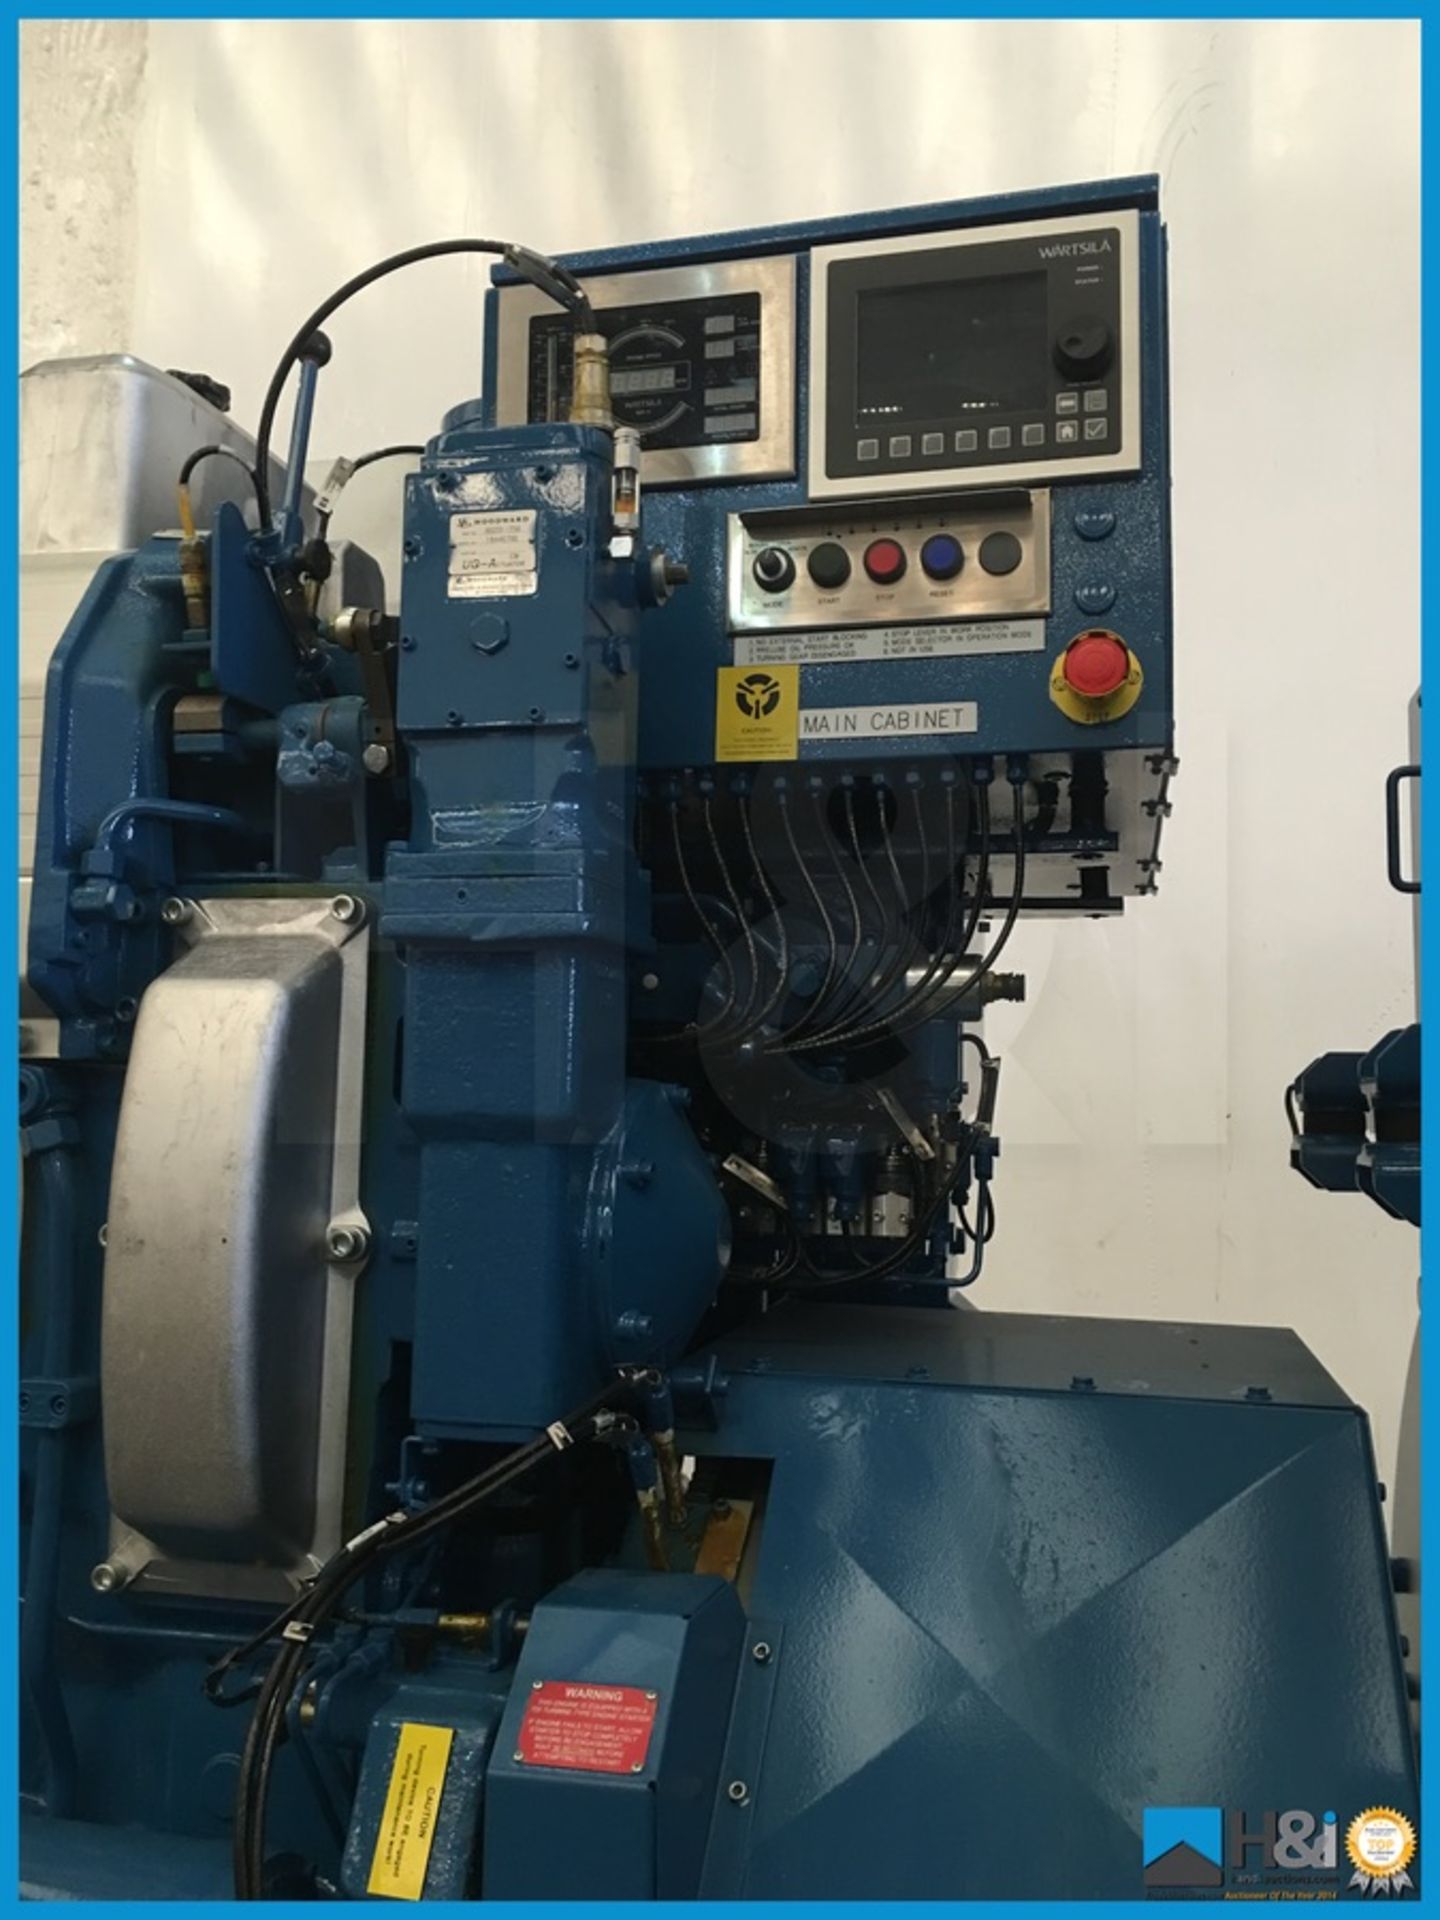 Unused Wartsila 9L20 high capacity diesel generator manufactured in 2013 for a large marine - Image 5 of 17